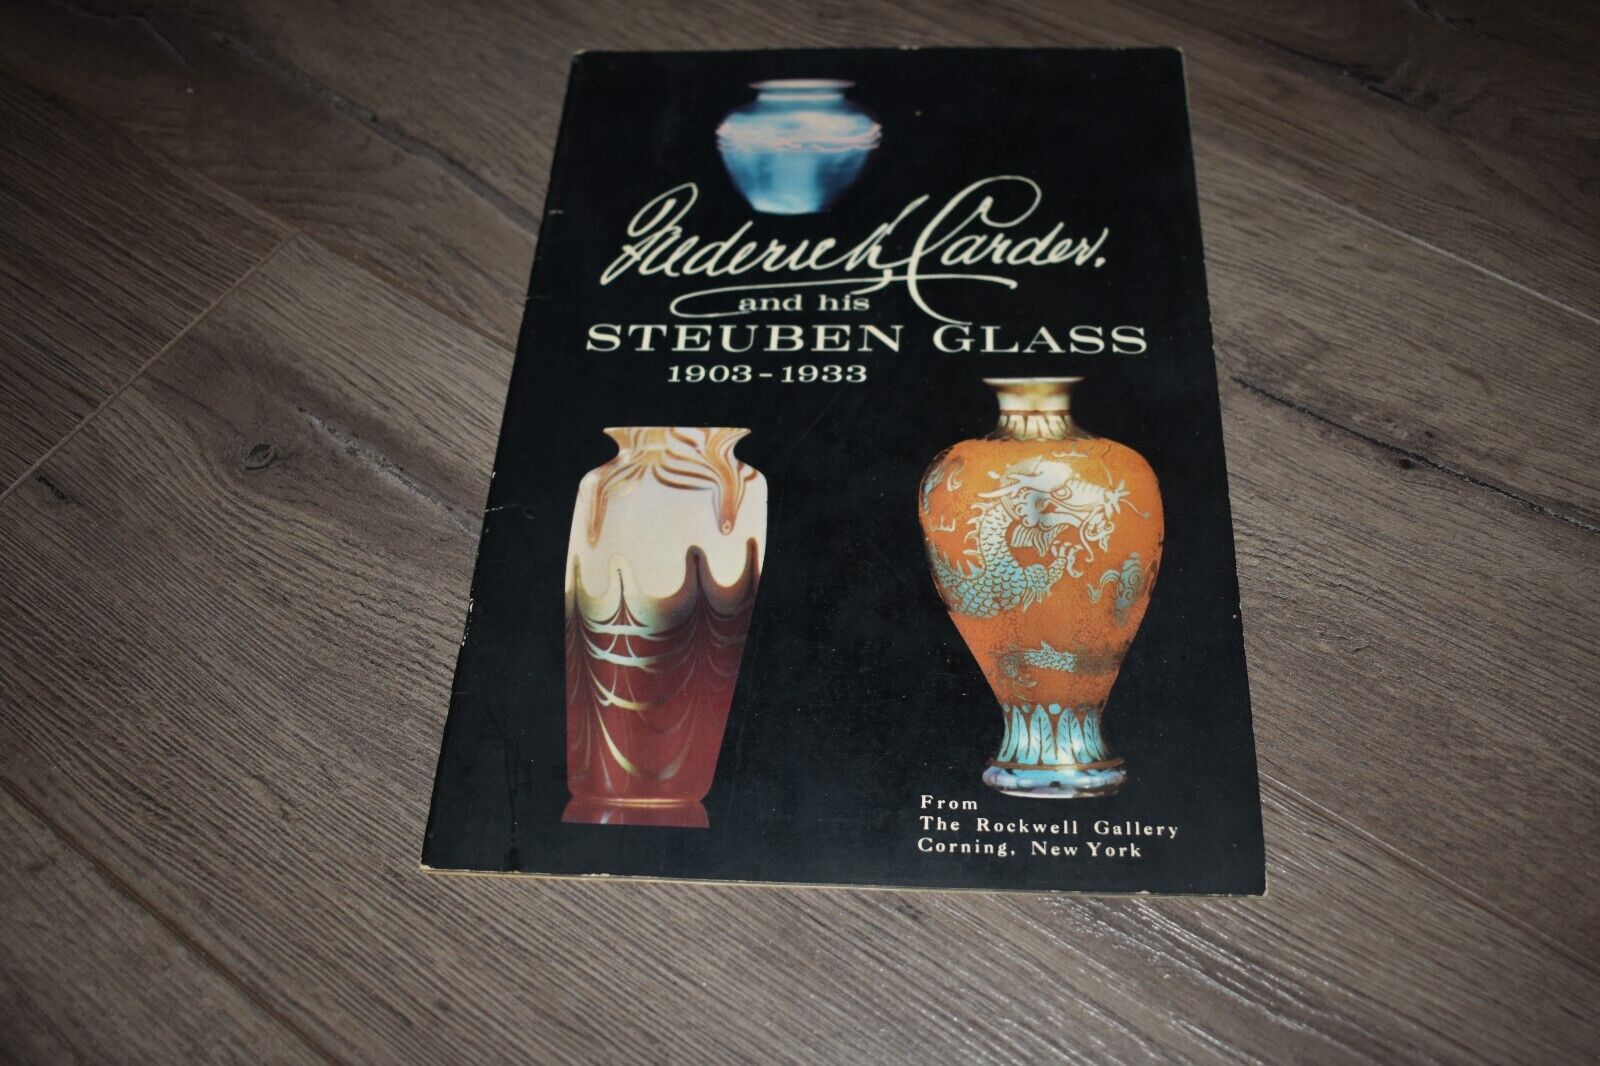 Frederick Carder & His Steuben Glass 1903-1933 by Robert Rockwell 1966